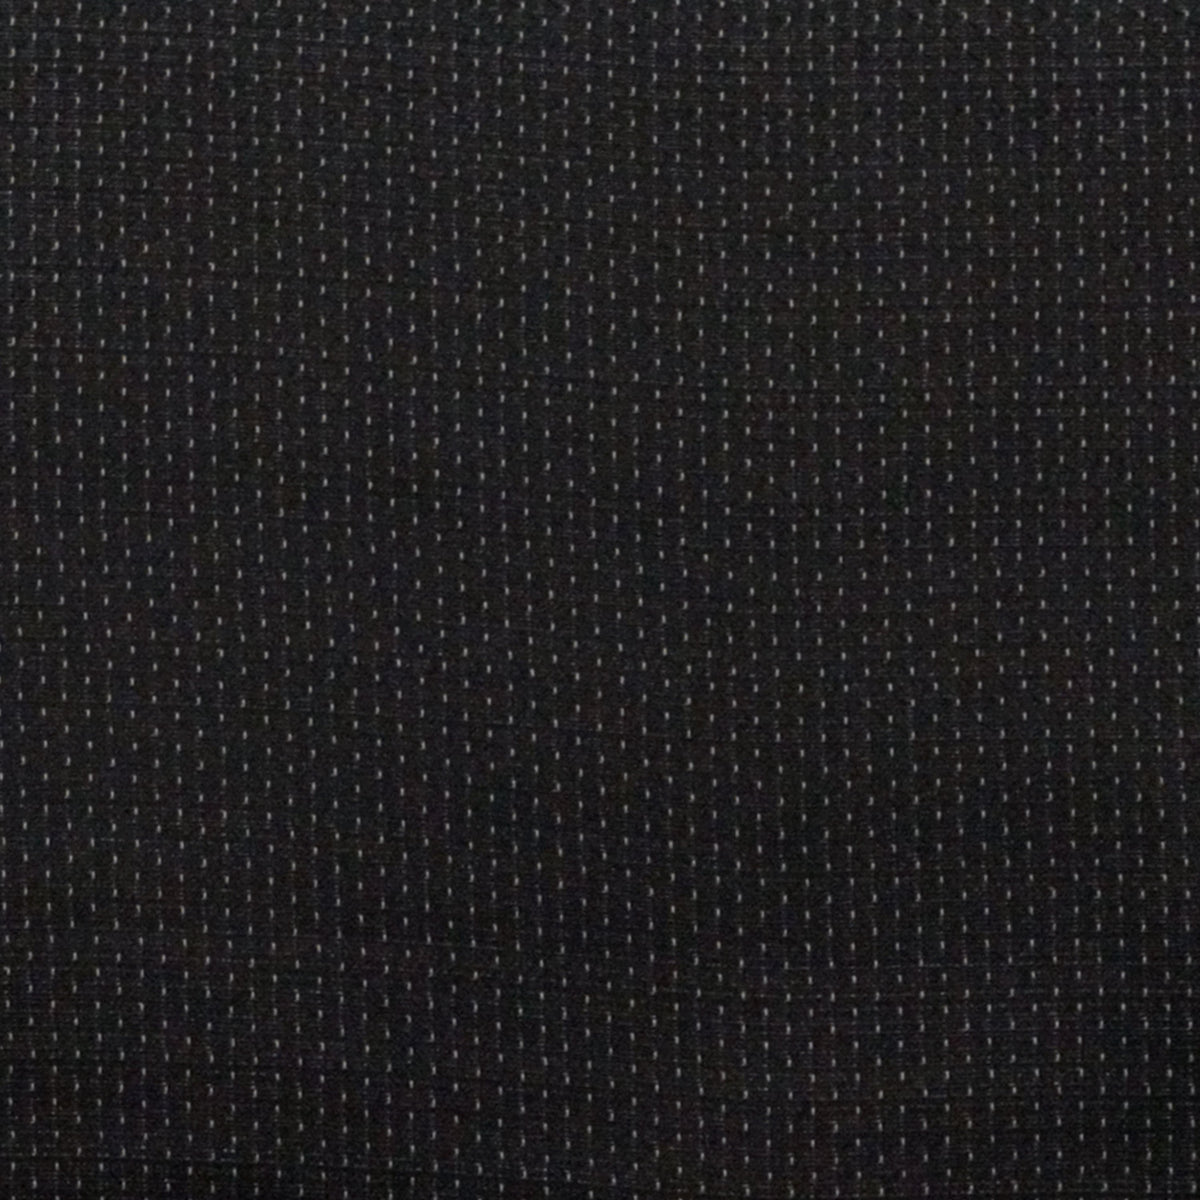 Black Patterned Fabric |#| Heavy Duty Black Dot Fabric Stack Chair with Arms - Reception Furniture